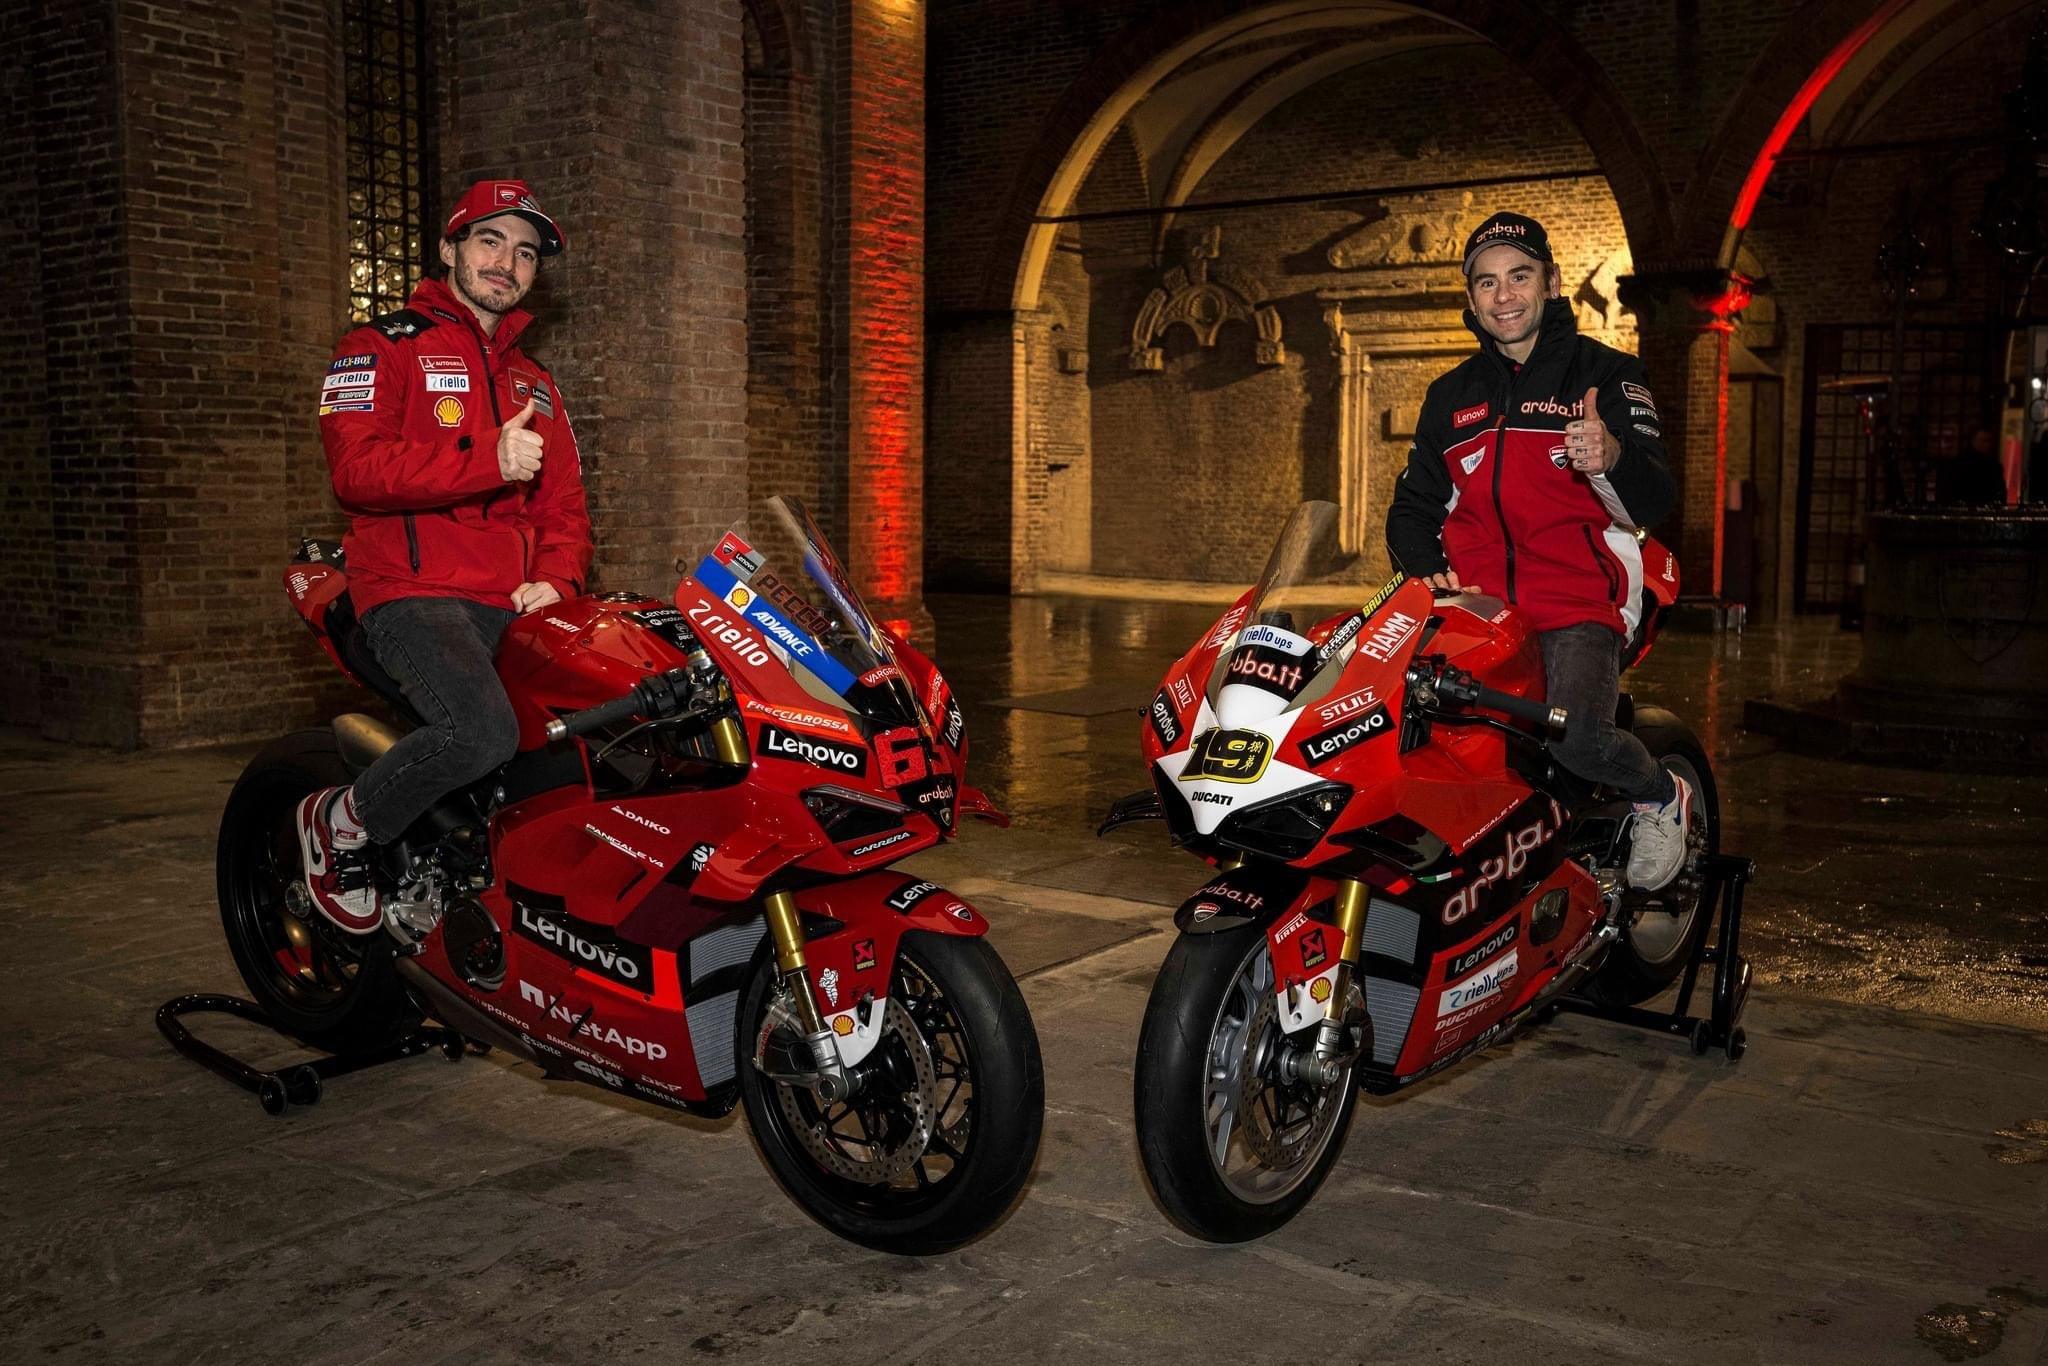 Ducati have unveiled their World Champion Replicas